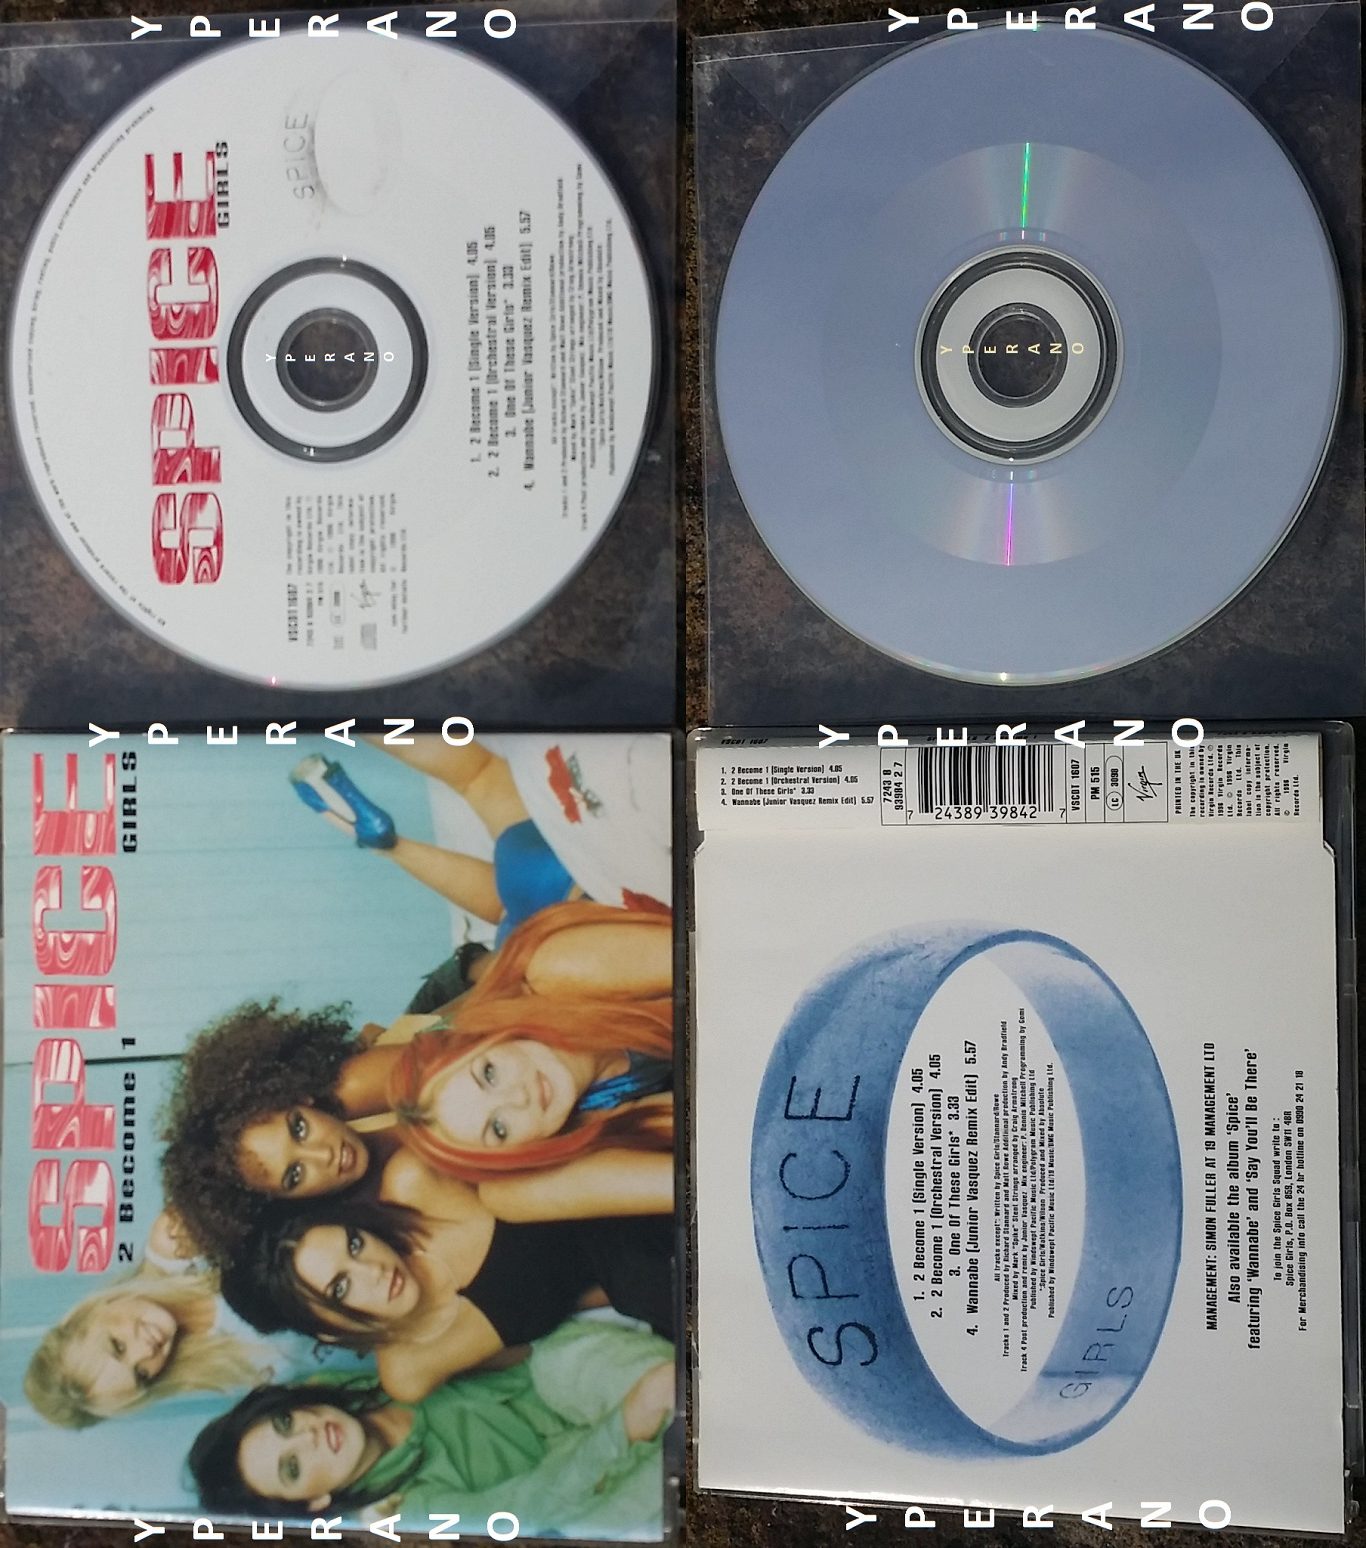 Spice Girls 2 Become 1 Cd Single Includes Great Orchestral Version And A Wannabe Remix Check Video Yperano Records